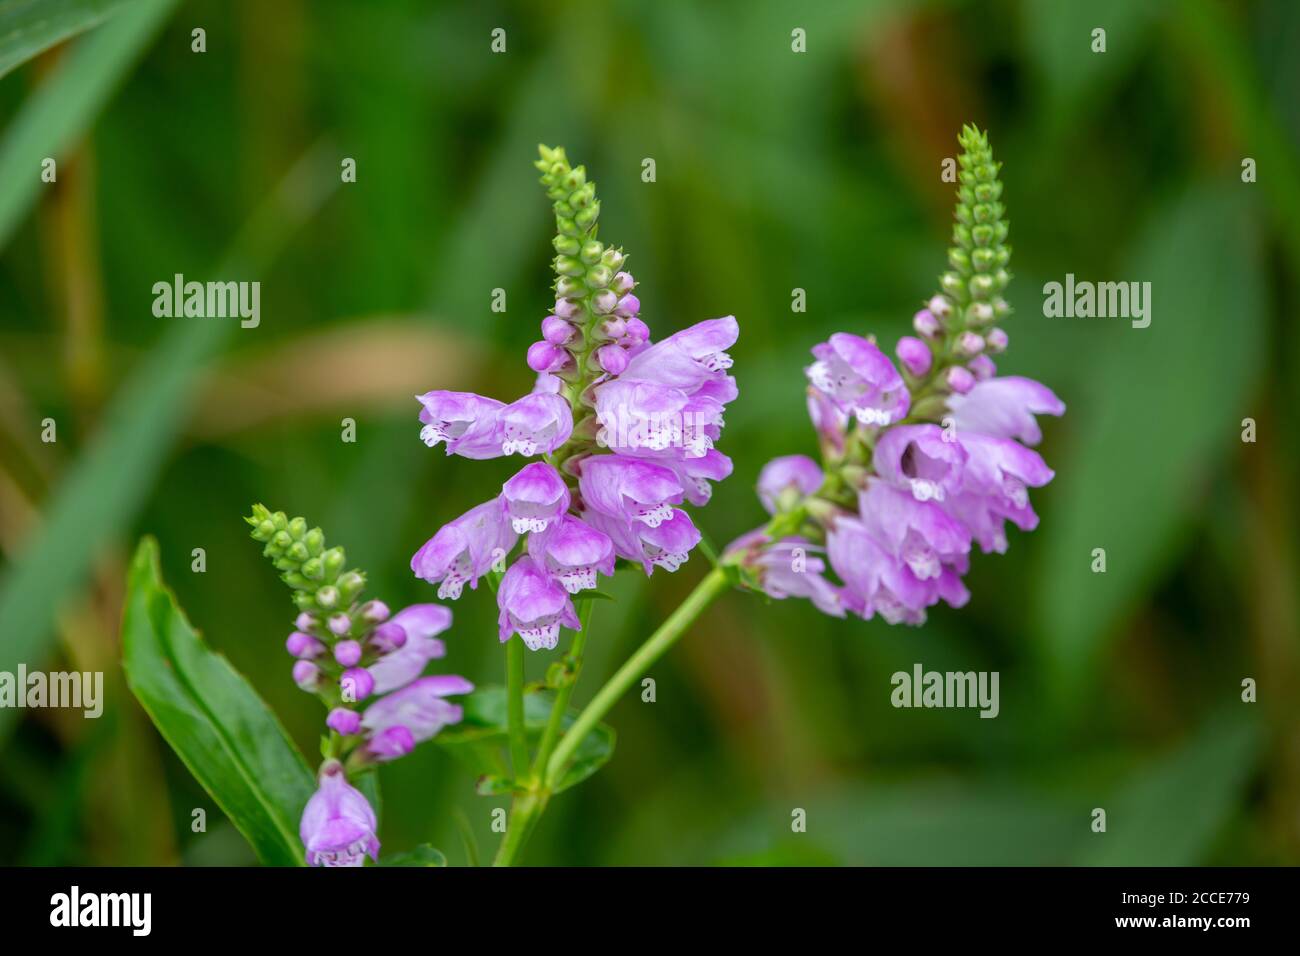 Bunch of Plum Physostegia Obedient Plant Realistic Artificial Silk Wild Flowers 